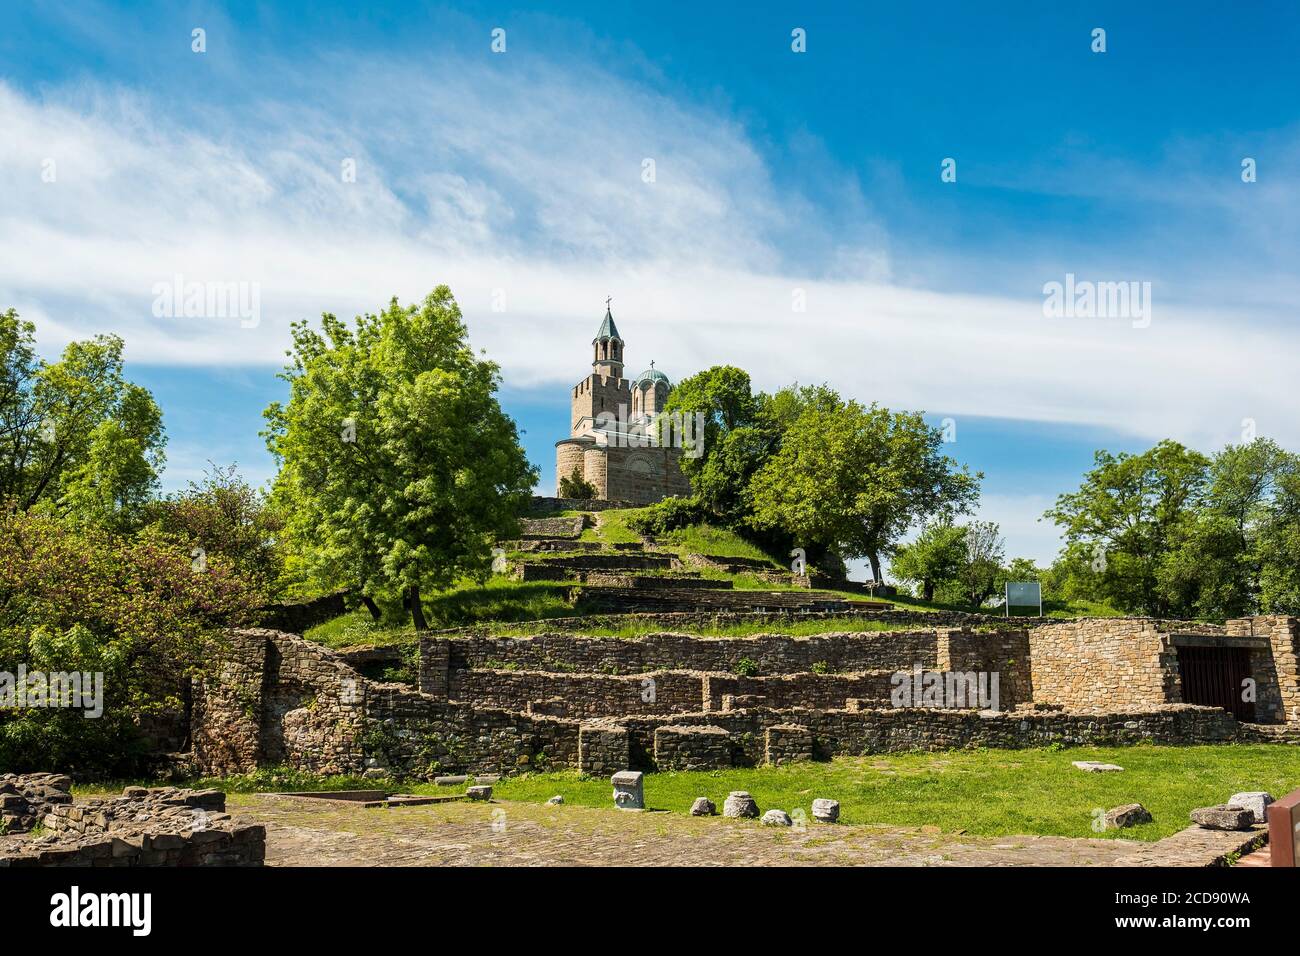 Bulgaria, Veliko Tarnovo, Church of the Royal City, symbol of the glory of the Second Bulgarian Empire and the independence lost during the Ottoman invasions in Europe. Impregnable fortress, Tsarevets fell from the hands of a traitor. Stock Photo